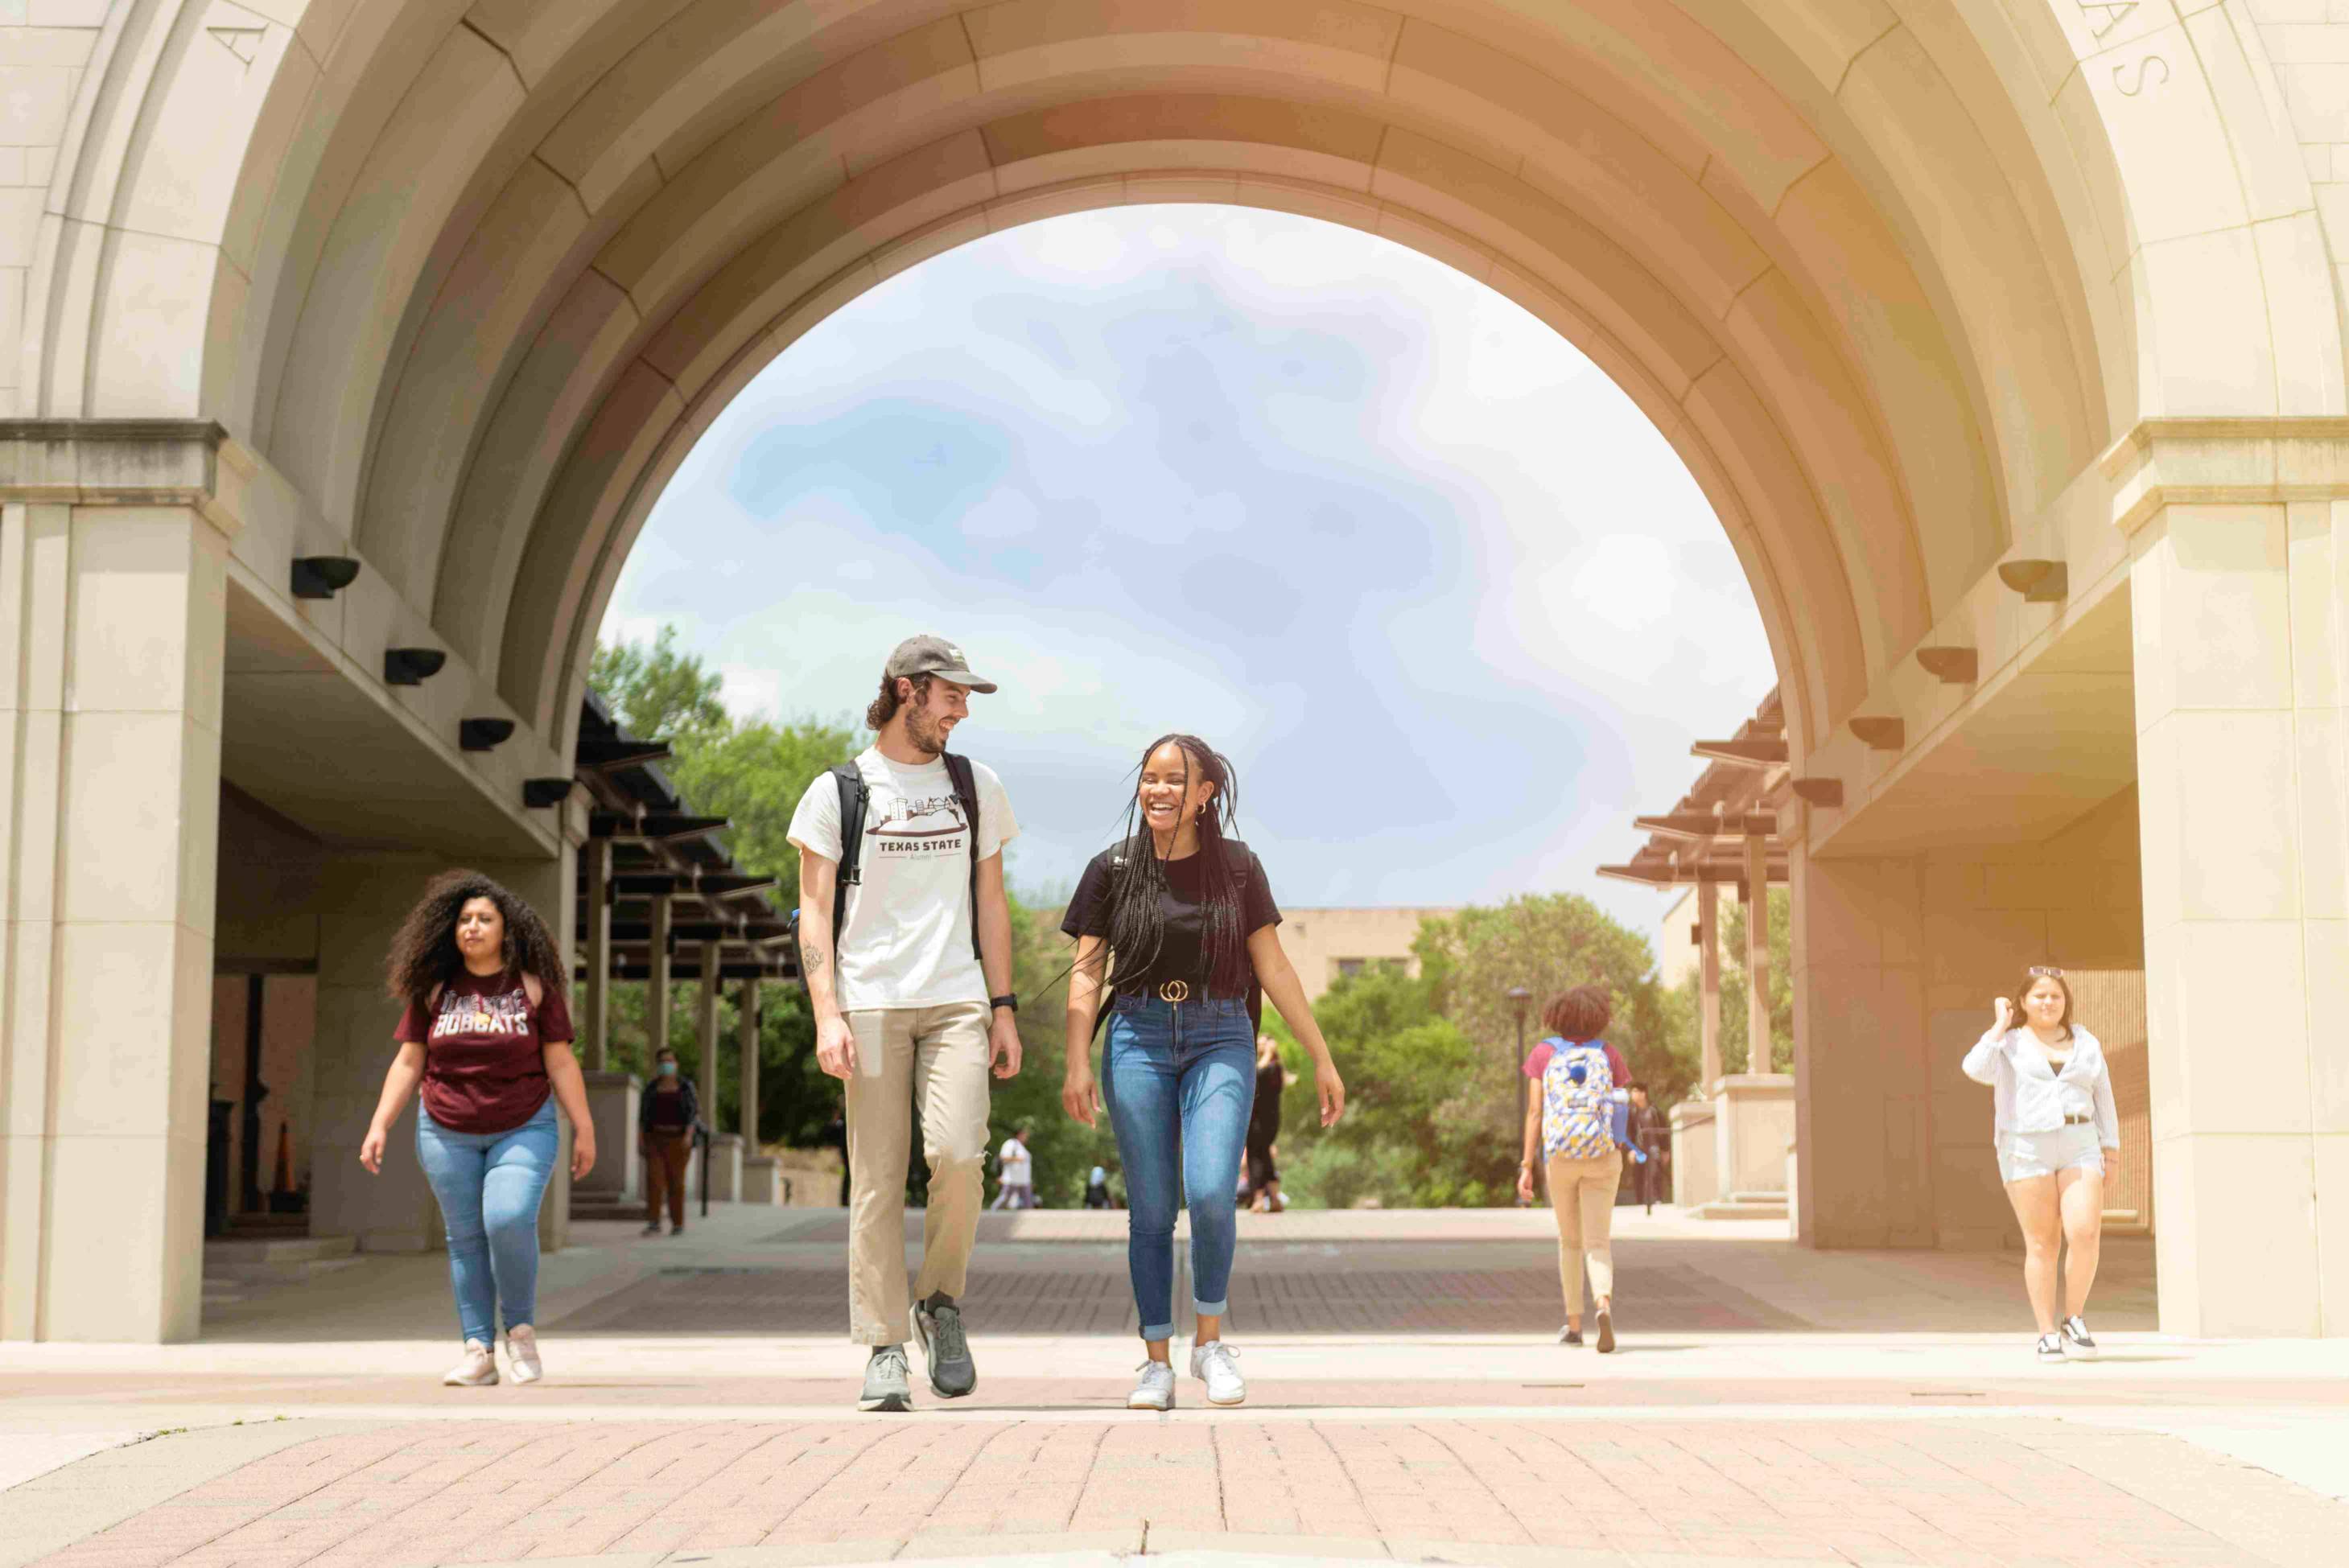 Students walking past campus arch